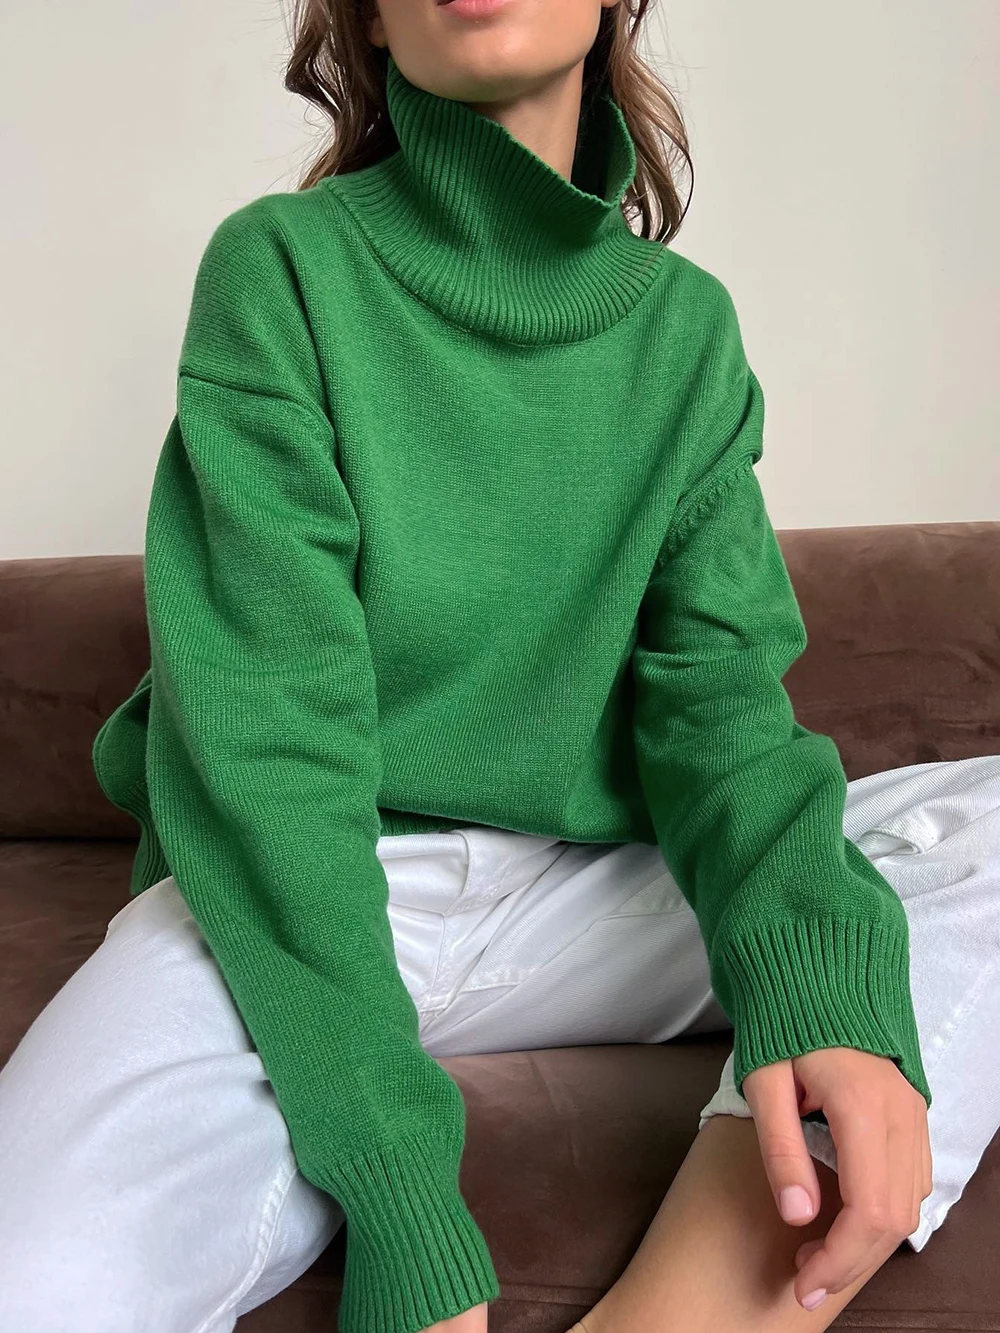 

Wixra Women Turtleneck Sweater Female Pullovers Soft Classic Basic New Knitted Tops Autumn Winter Lazy Oaf Pulls